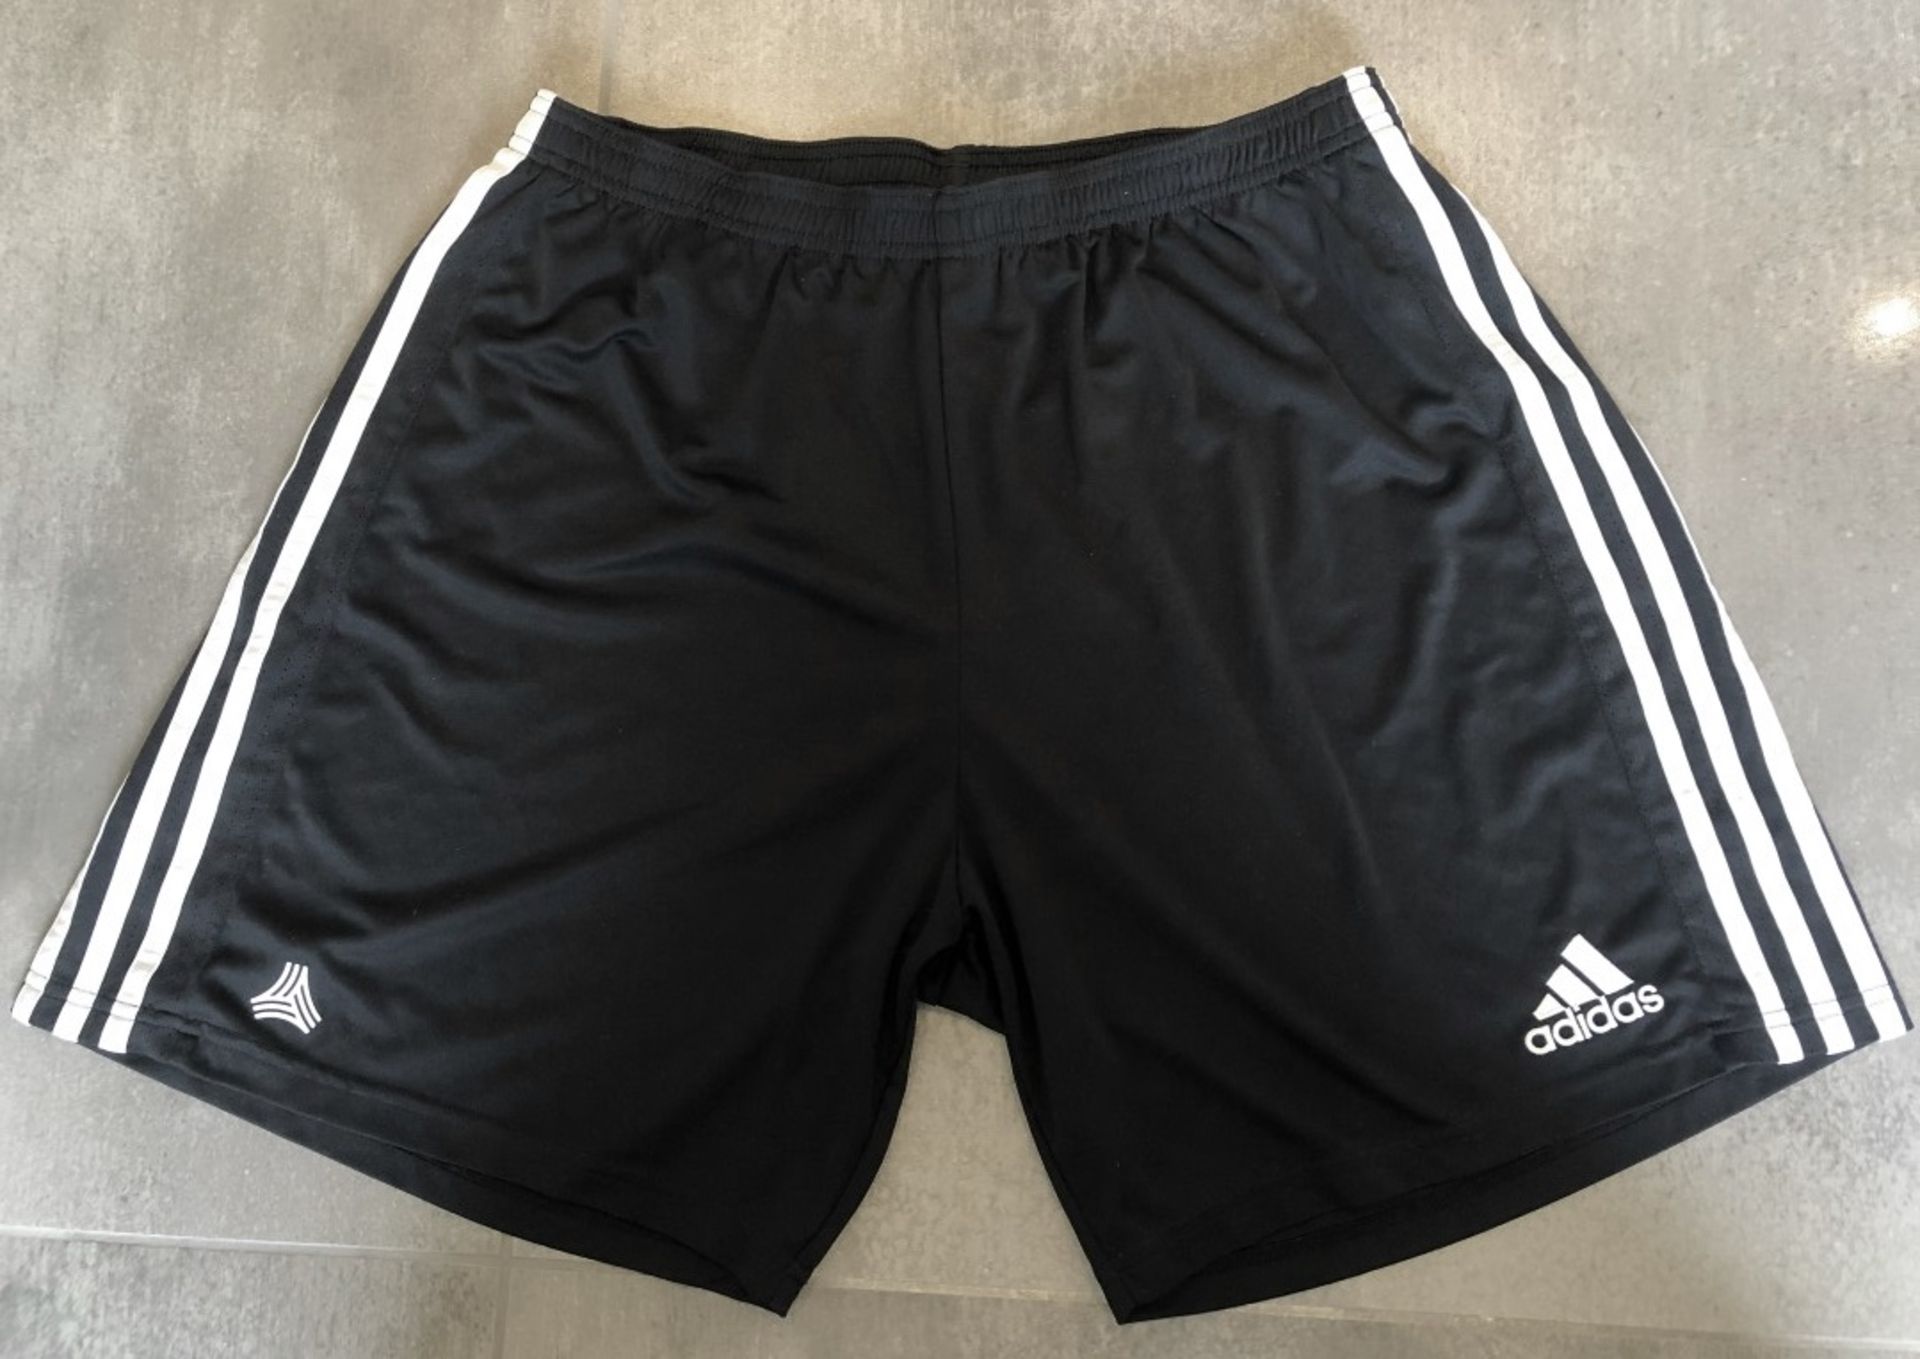 4 x Assorted Pairs Of Men's Genuine Adidas Shorts - AllIn Black - Sizes: L-XL - Preowned - Image 5 of 23